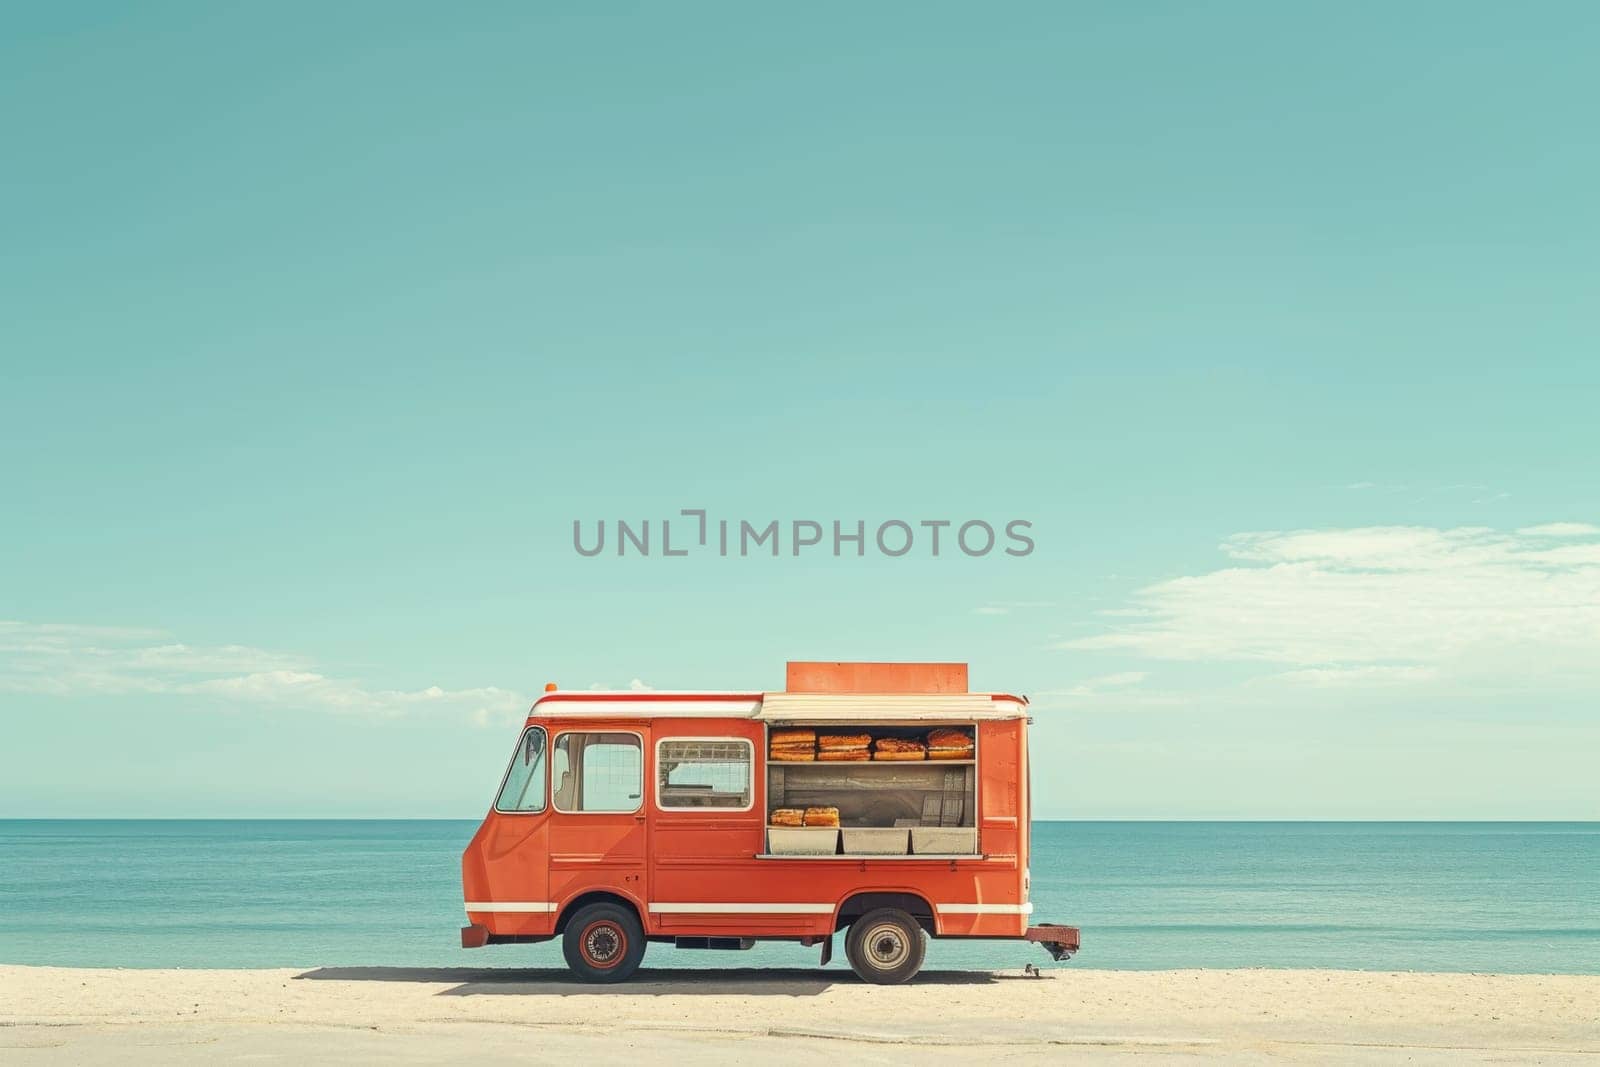 A retro orange camper van stands on the beach at the campsite. 3D illustration.